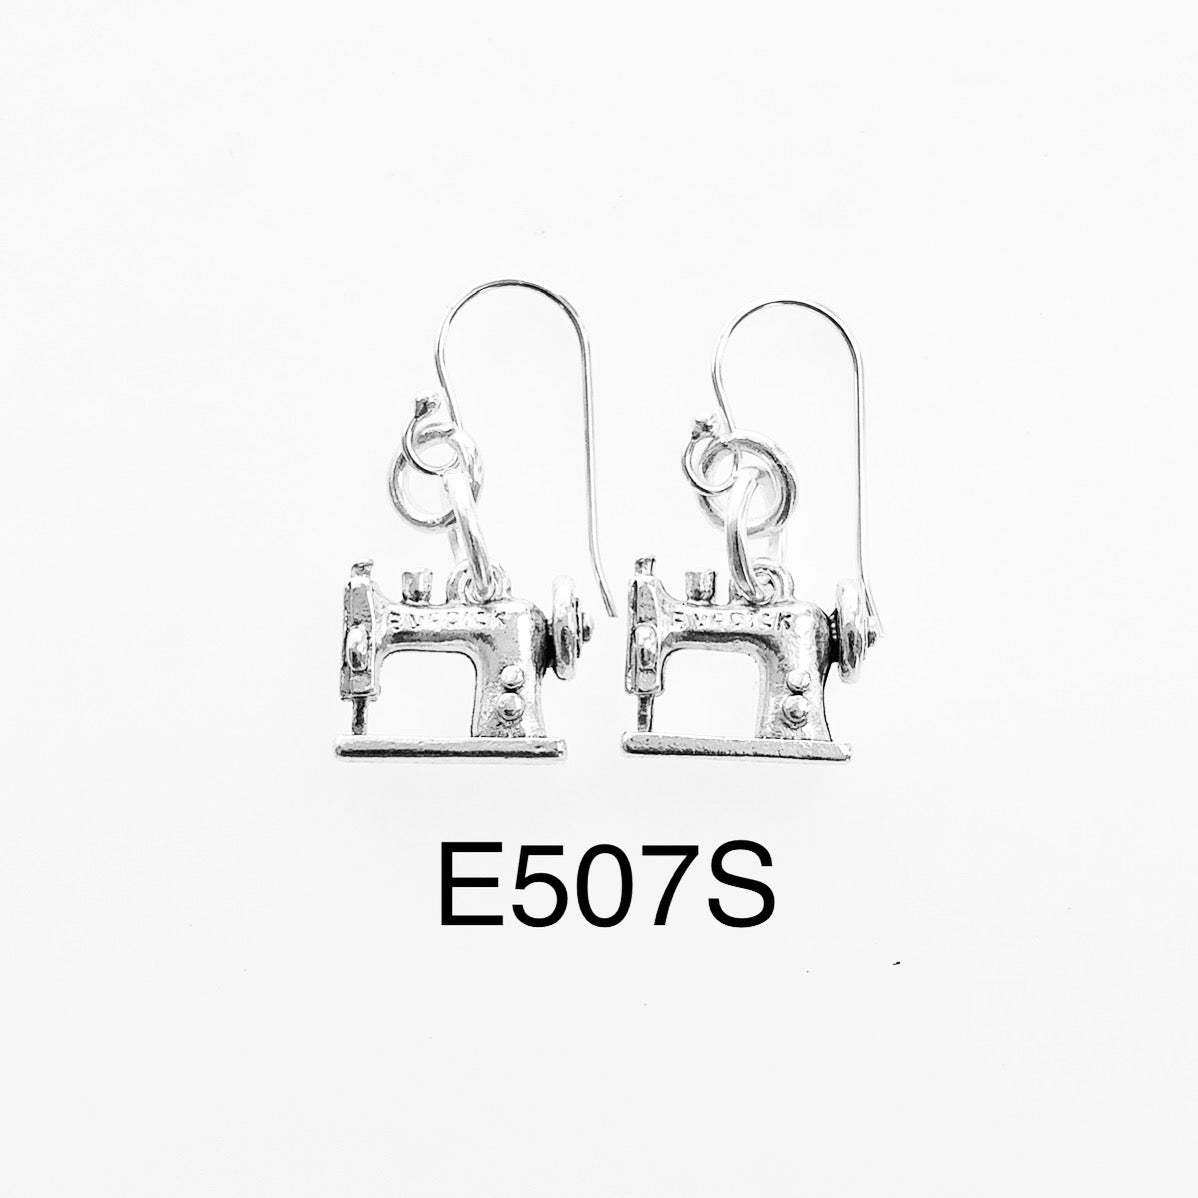 Quilting Sewing Machine Earring with Sterling Earring Wire